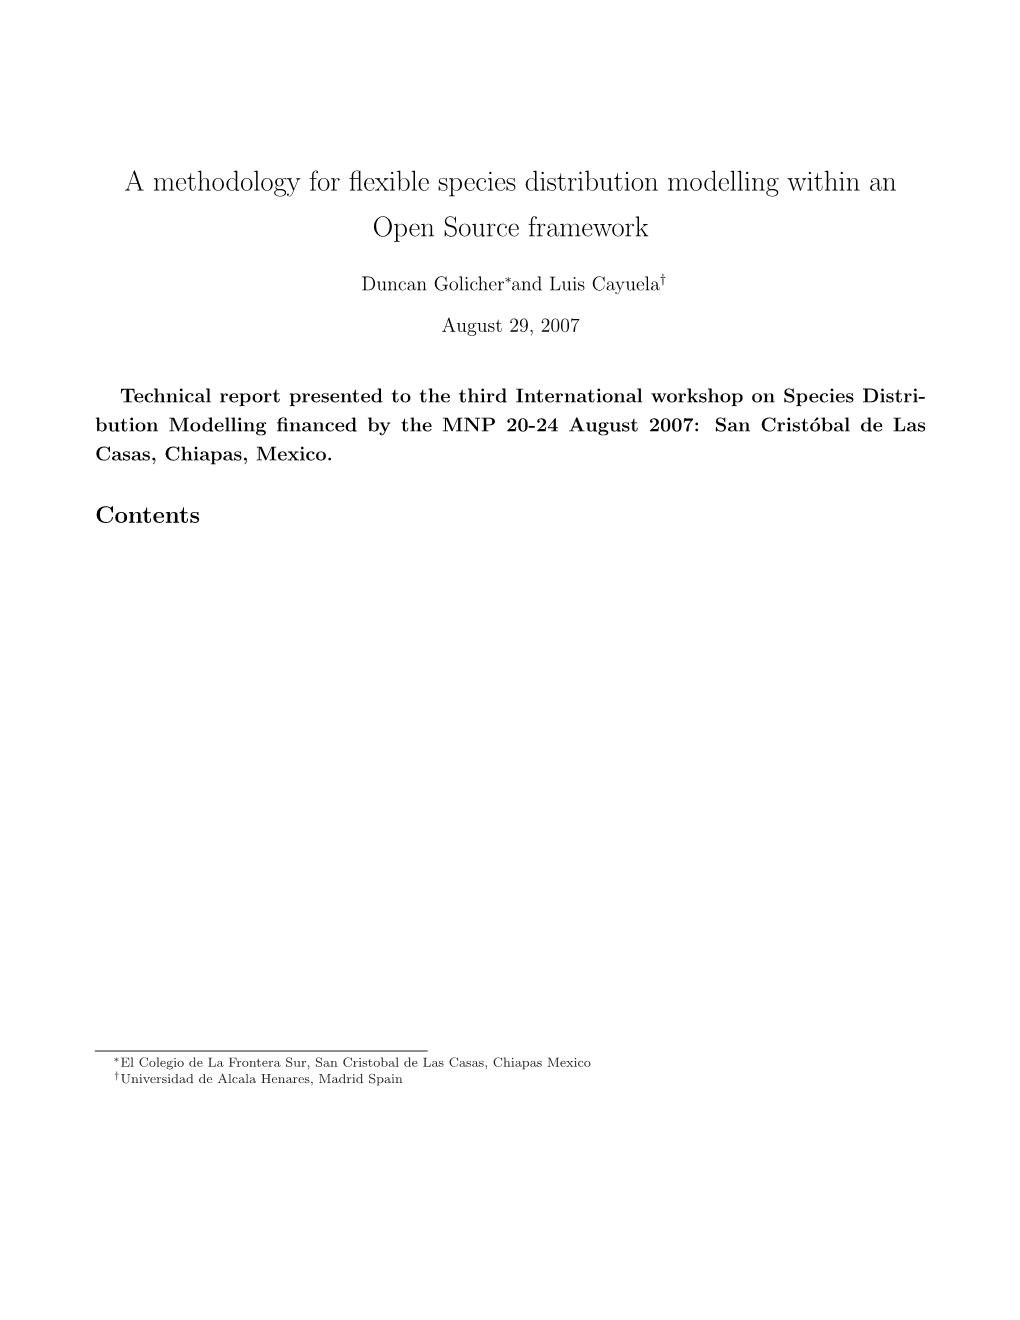 A Methodology for Flexible Species Distribution Modelling Within an Open Source Framework